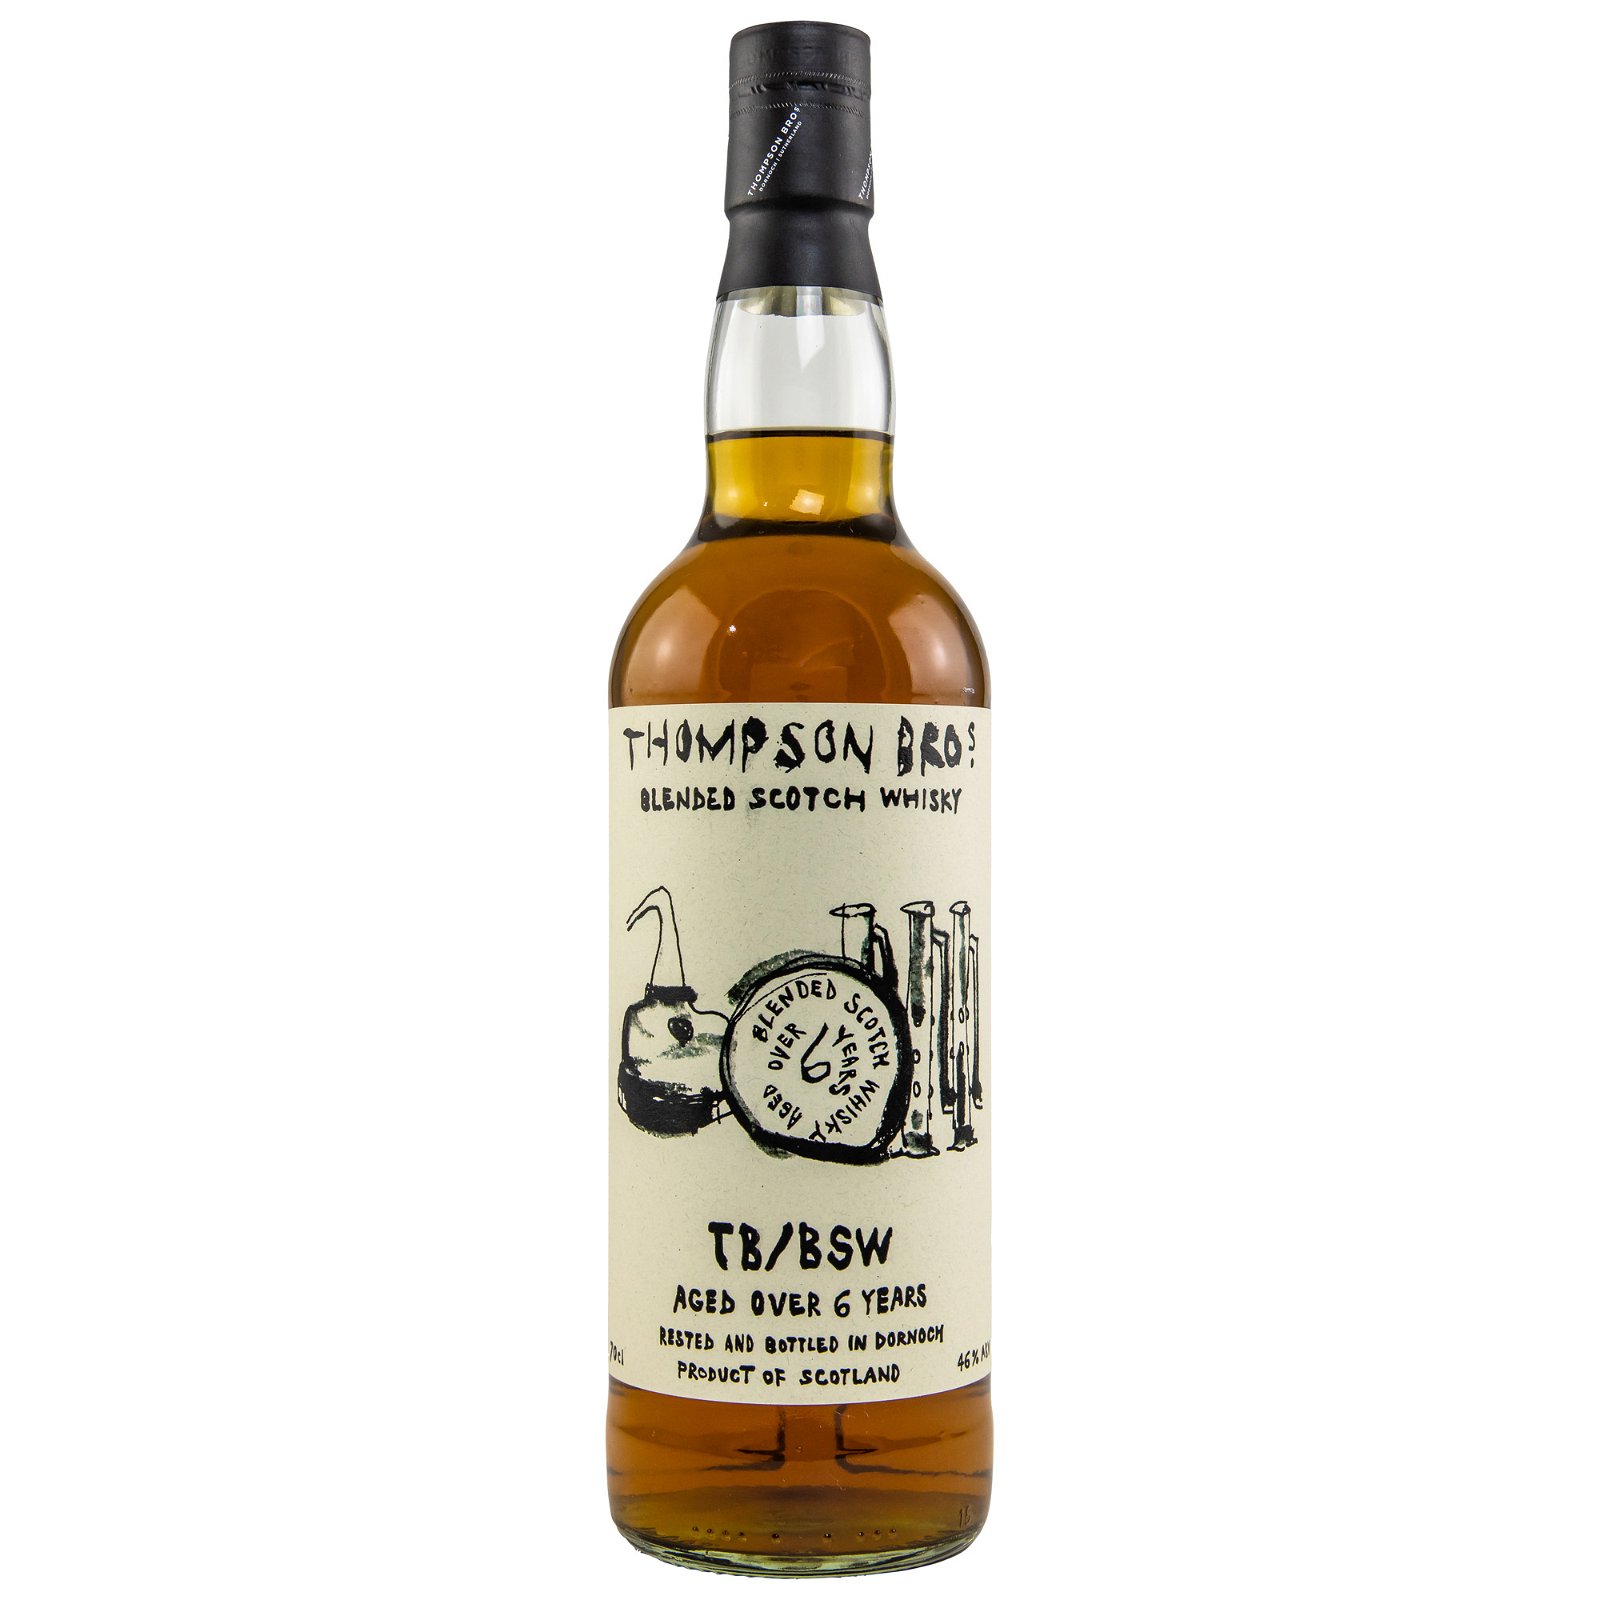 TB/BSW Blended Scotch Whisky 6 Jahre (Thompson Bros.)